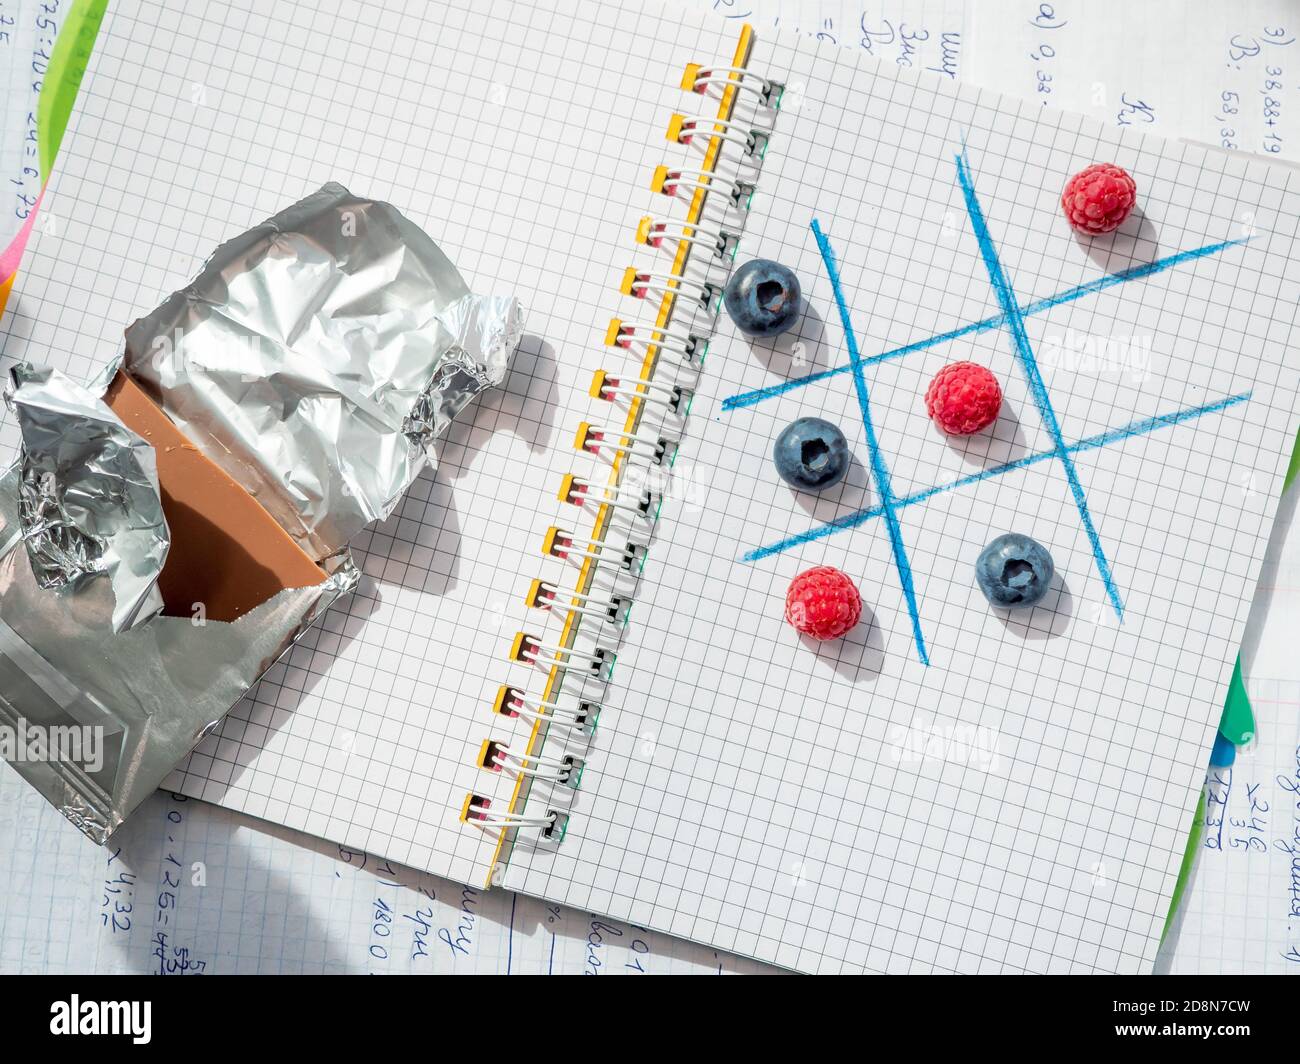 Back to school concept. Tic-tac-toe logic game by raspberries and blueberries on open squared ring-bound notebook near chocolate bar in a silver foil. Stock Photo